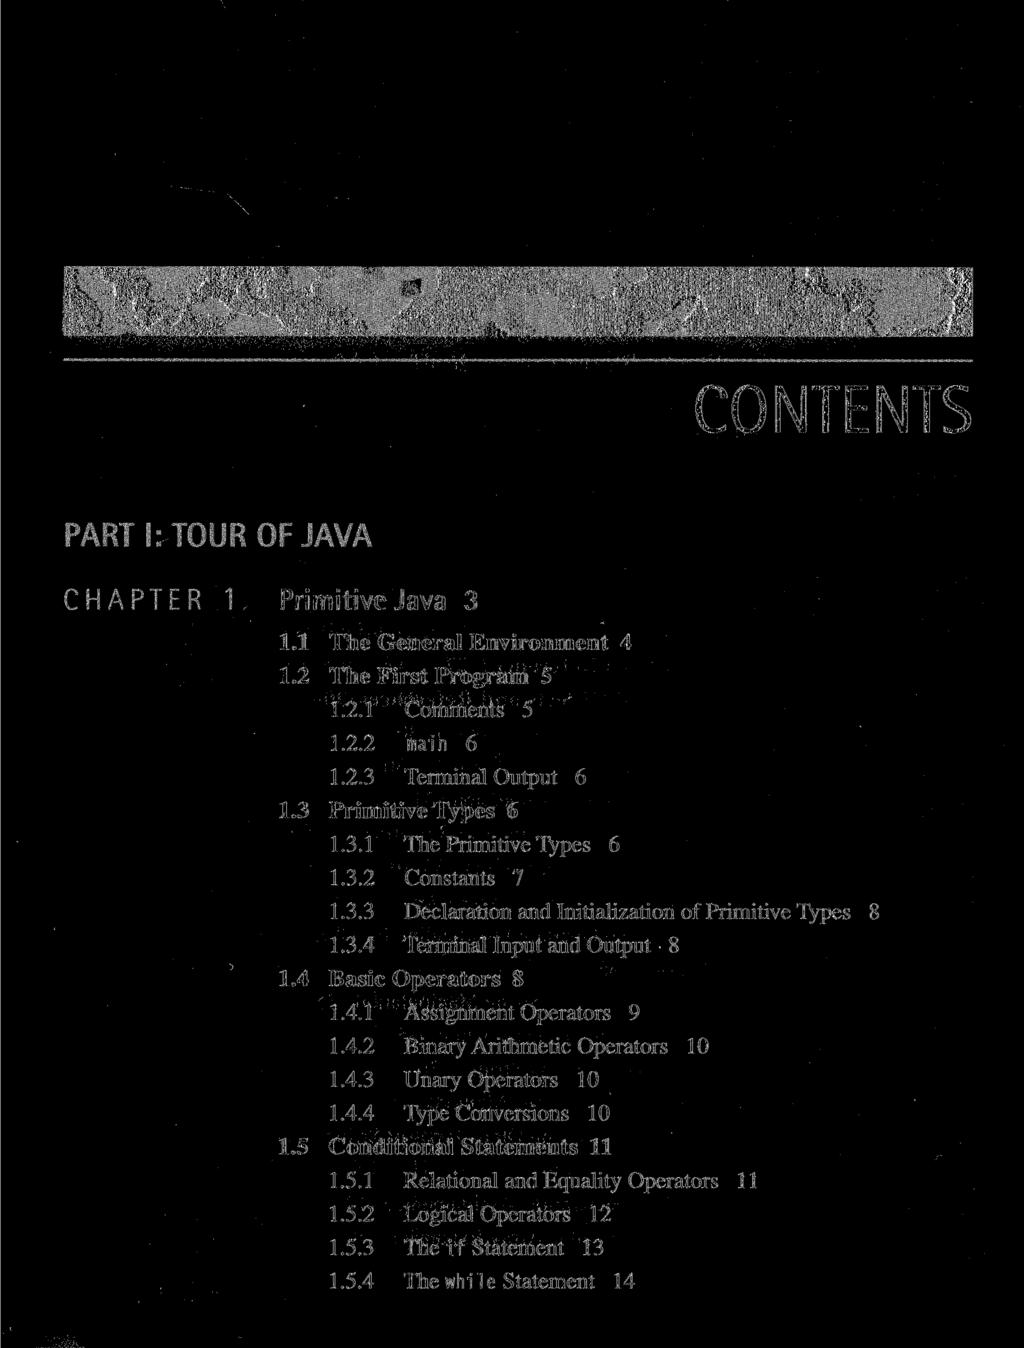 CONTENTS PART I: TOUR OF JAVA CHAPTER 1 Primitive Java 3 1.1 The General Environment 4 1.2 The First Program 5 1.2.1 Comments 5 1.2.2 main 6 1.2.3 Terminal Output 6 1.3 Primitive Types 6 1.3.1 The Primitive Types 6 1.